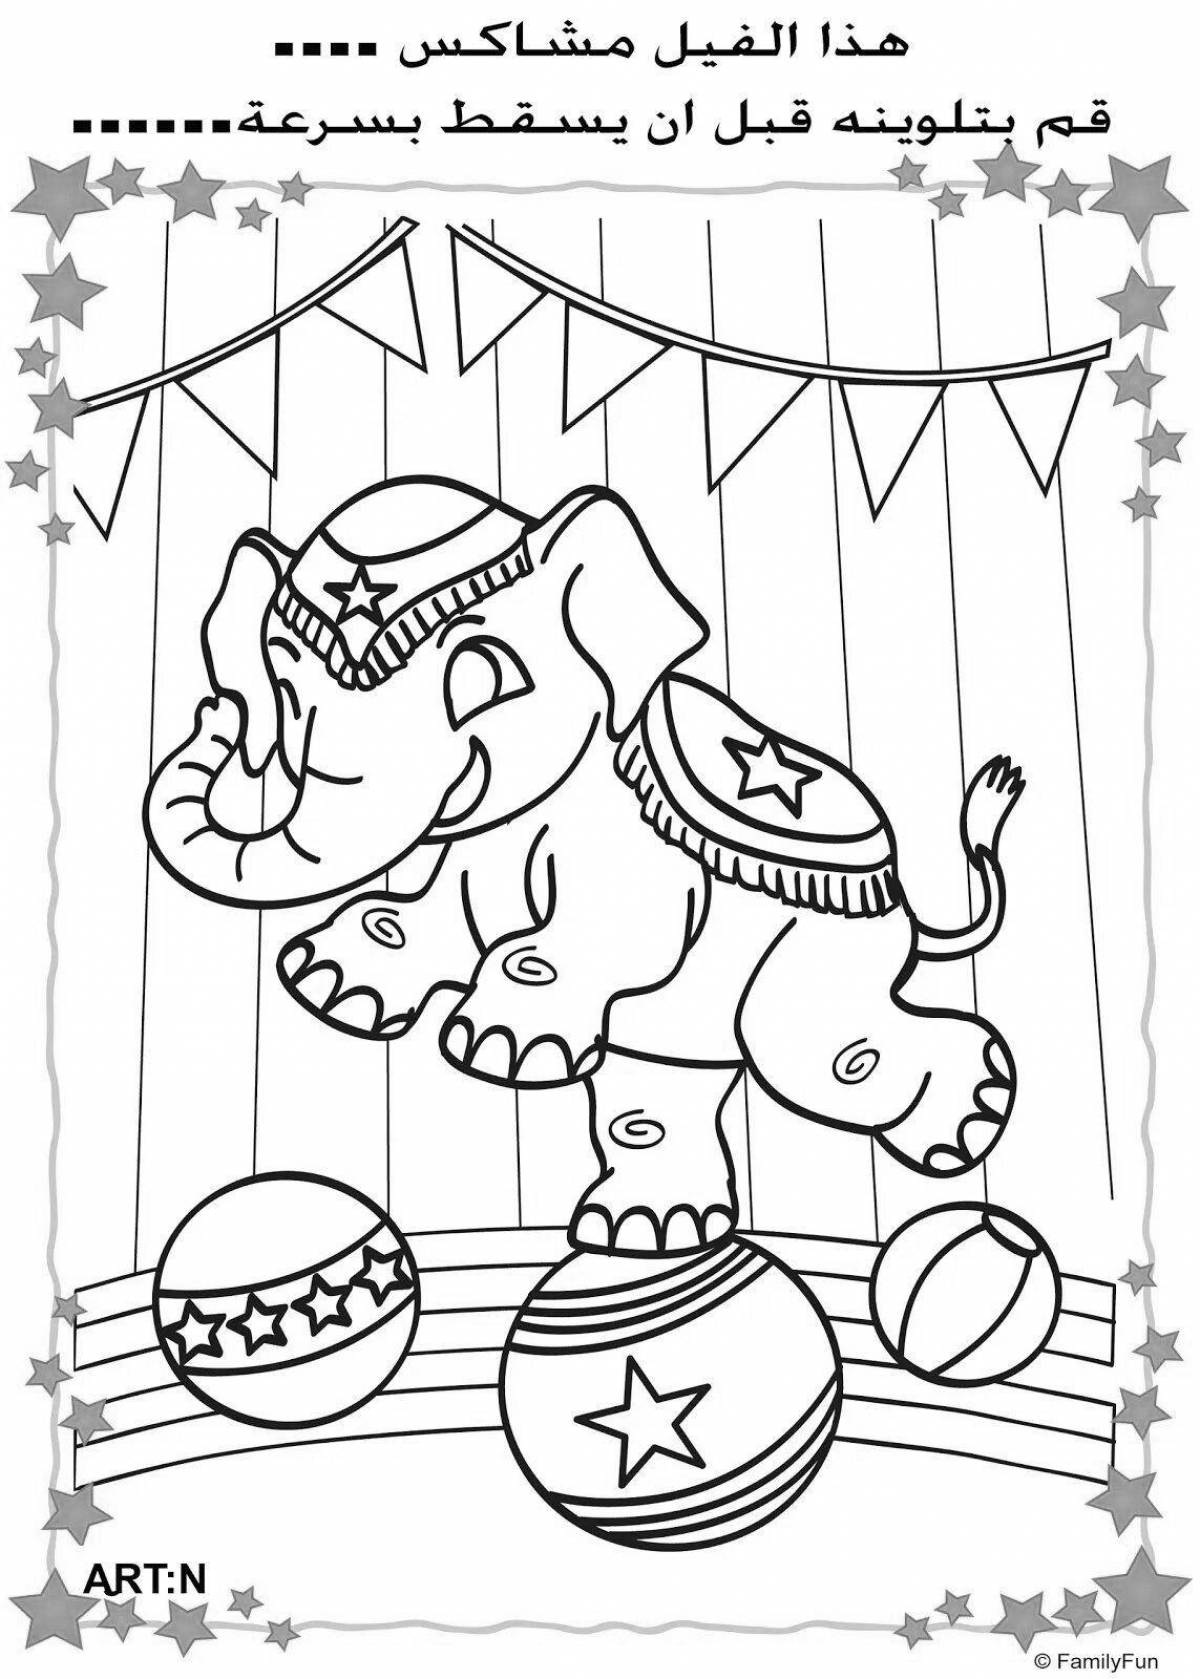 Coloring book joyous circus for children 5-6 years old